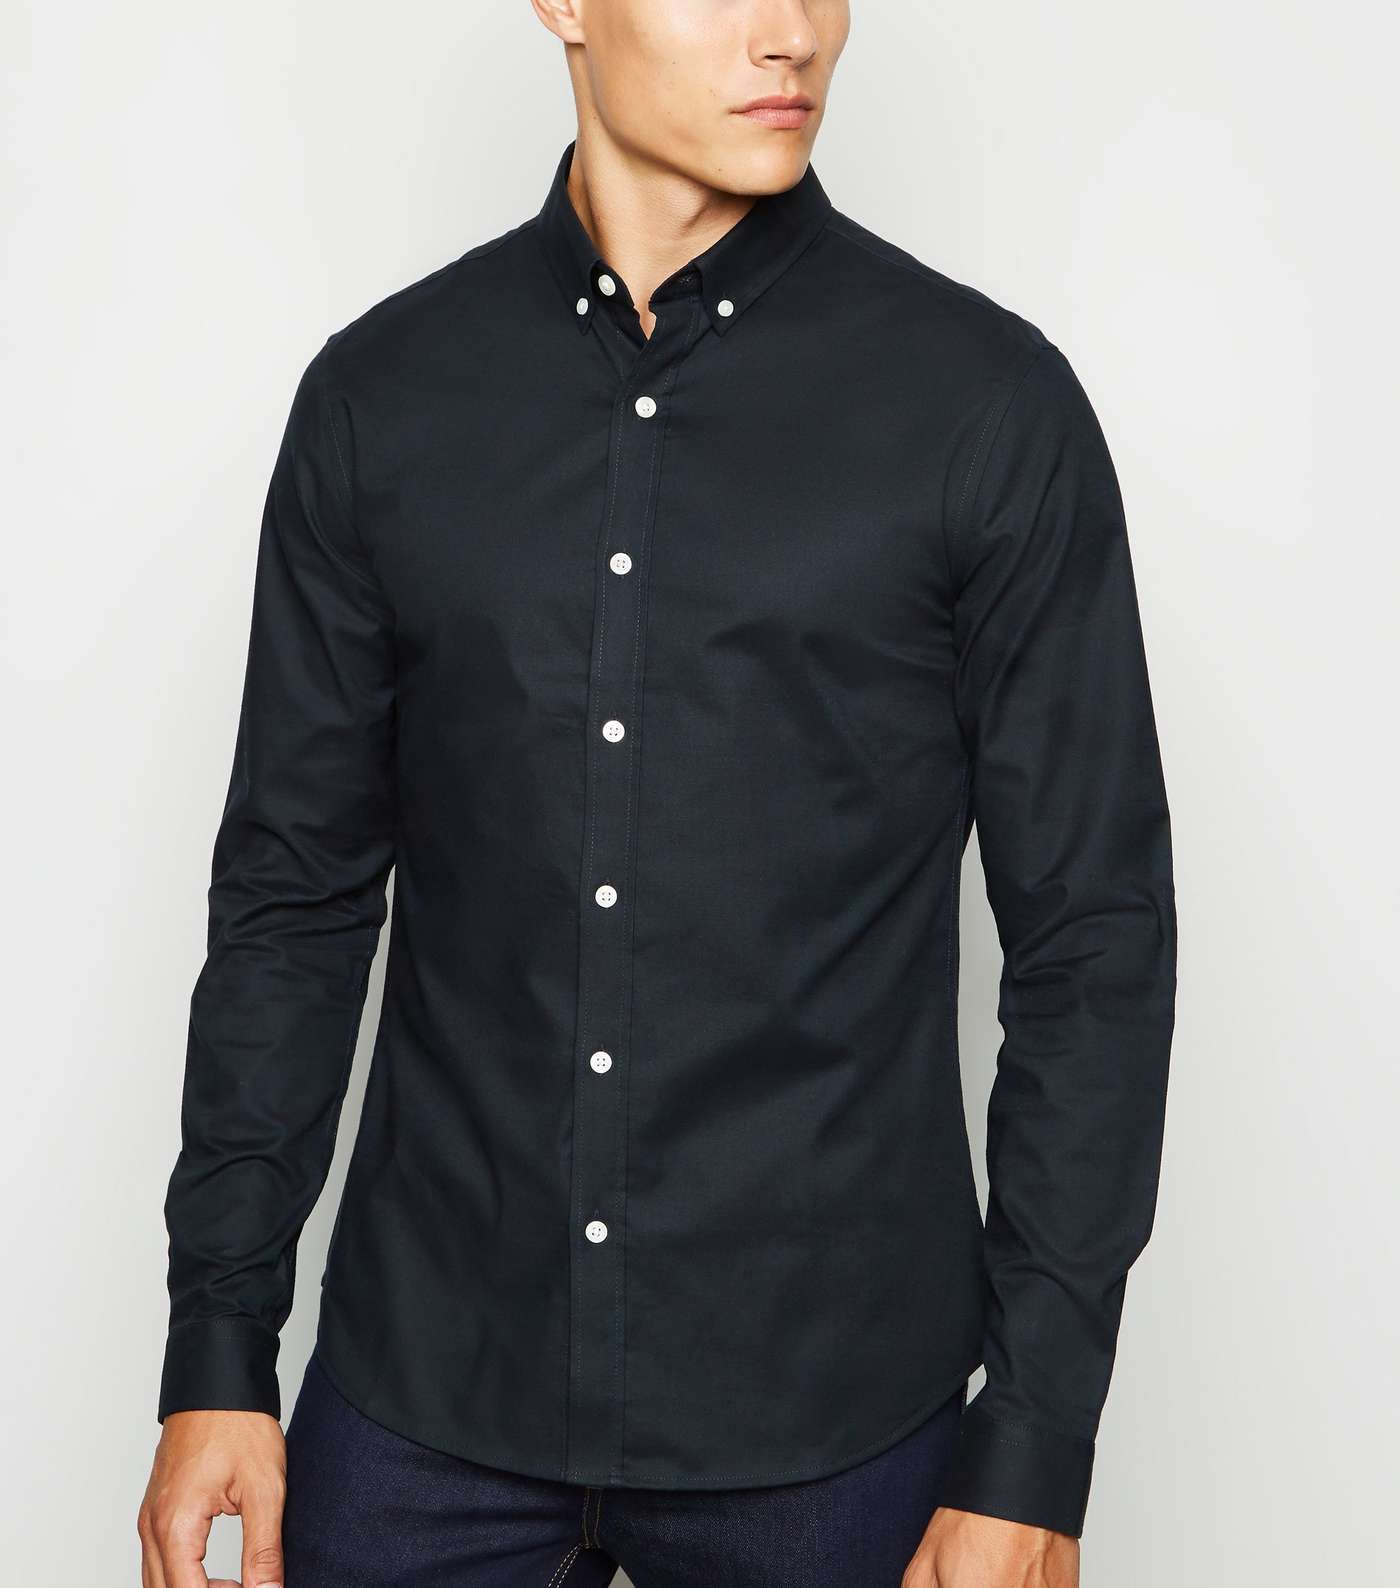 Navy Long Sleeve Muscle Fit Oxford Shirt